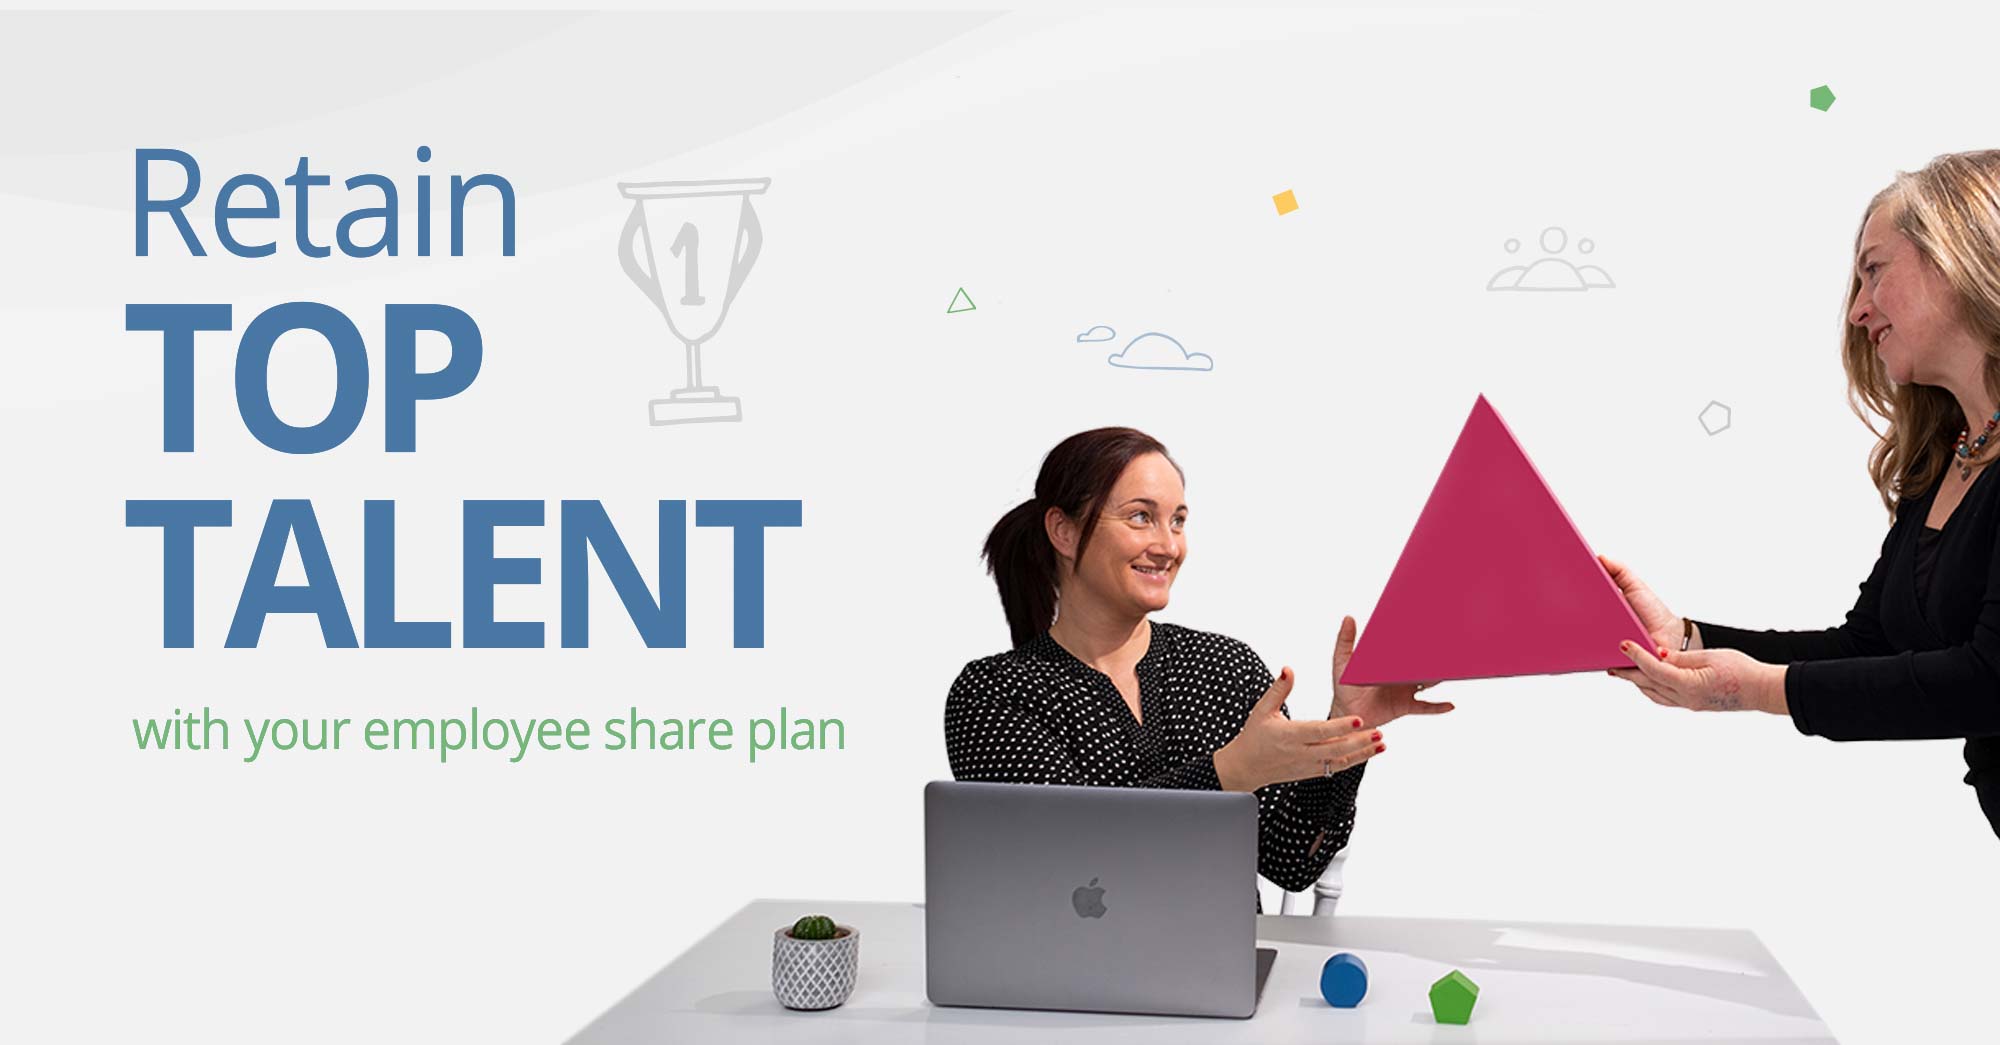 Retaining top employees with a share plan